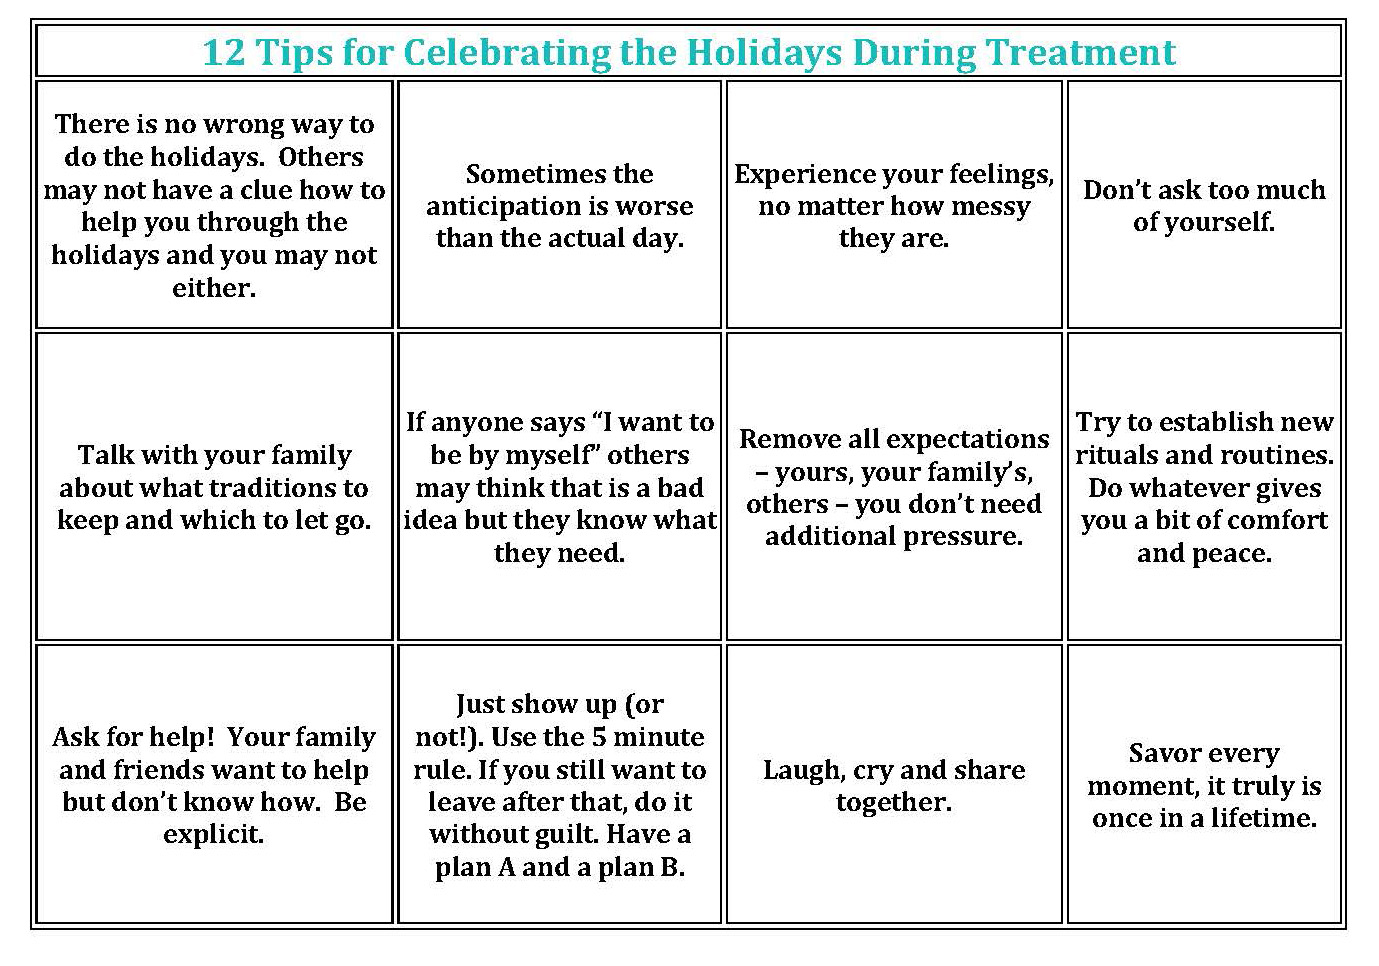 12 Tips for Celebrating the Holidays During Treatment